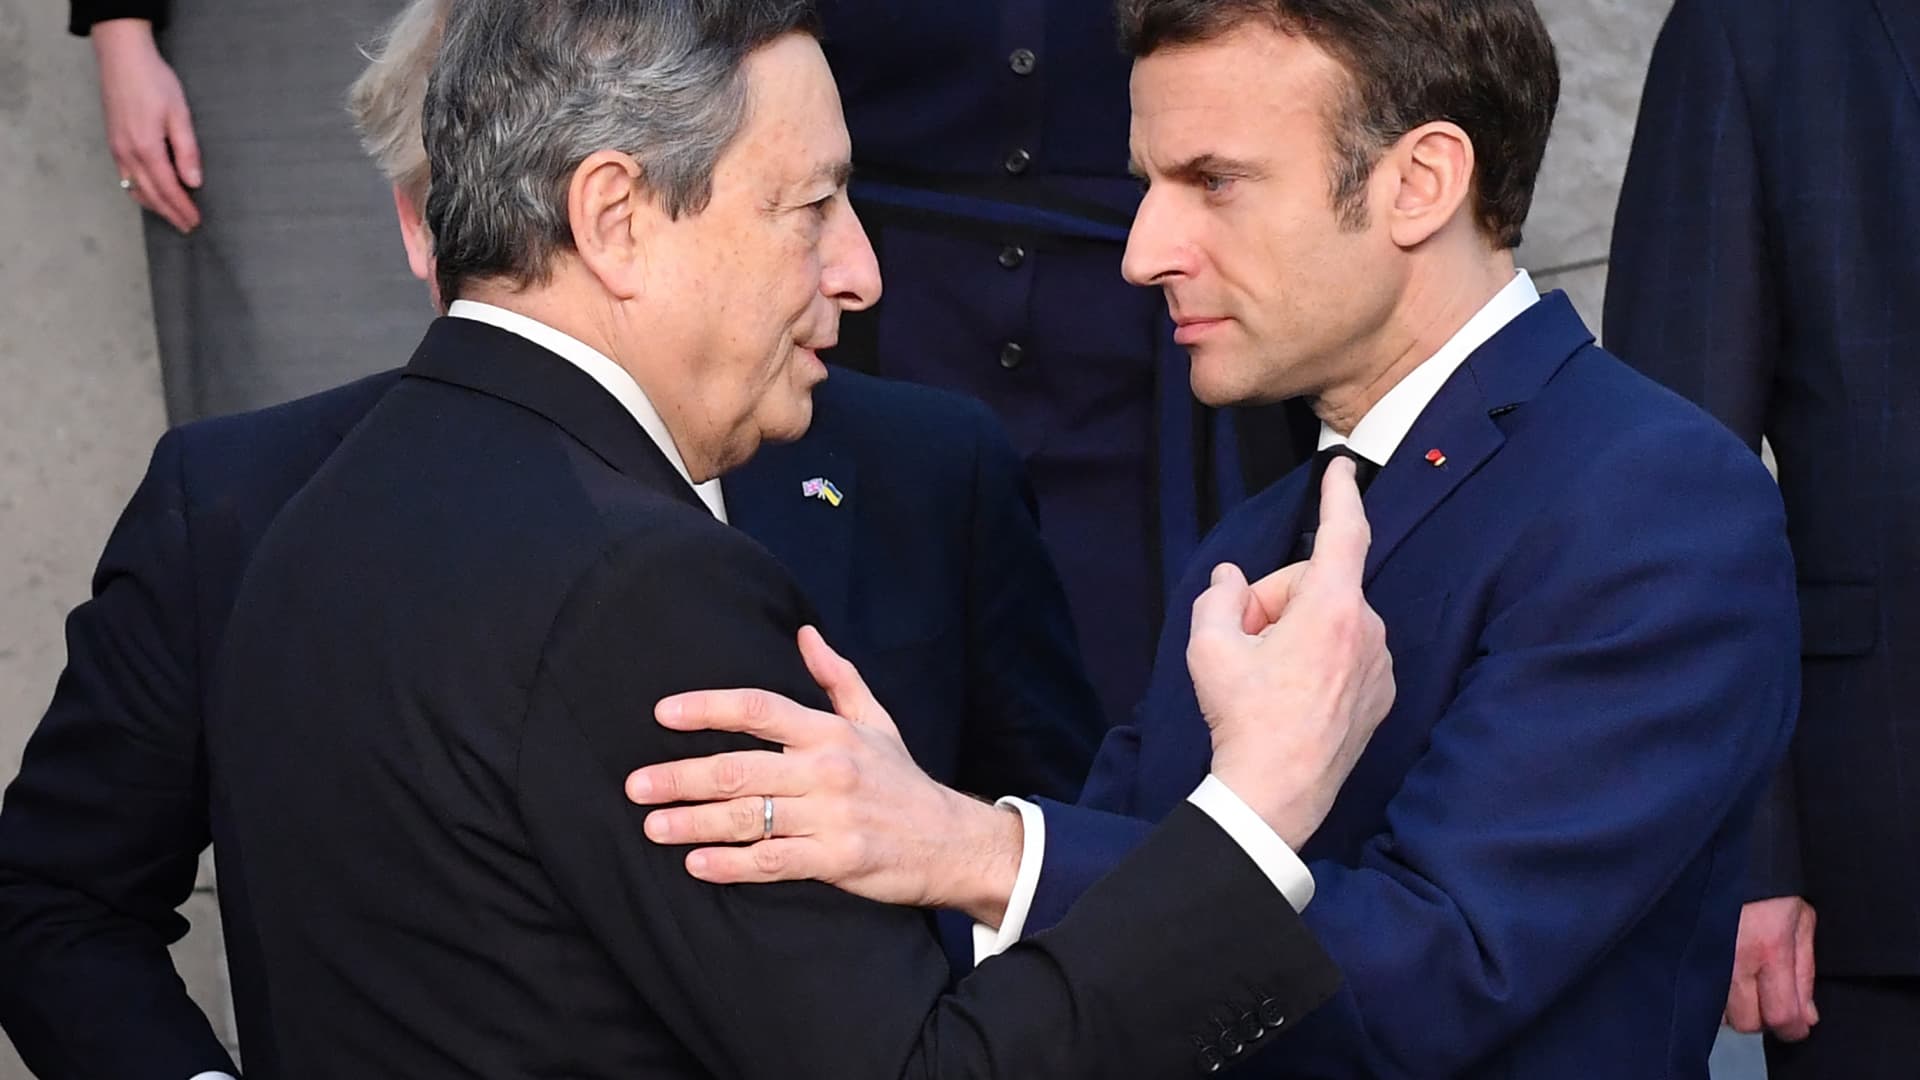 Italy's Prime Minister Mario Draghi shakes hands with France's President Emmanuel Macronat NATO Headquarters in Brussels on March 24, 2022.